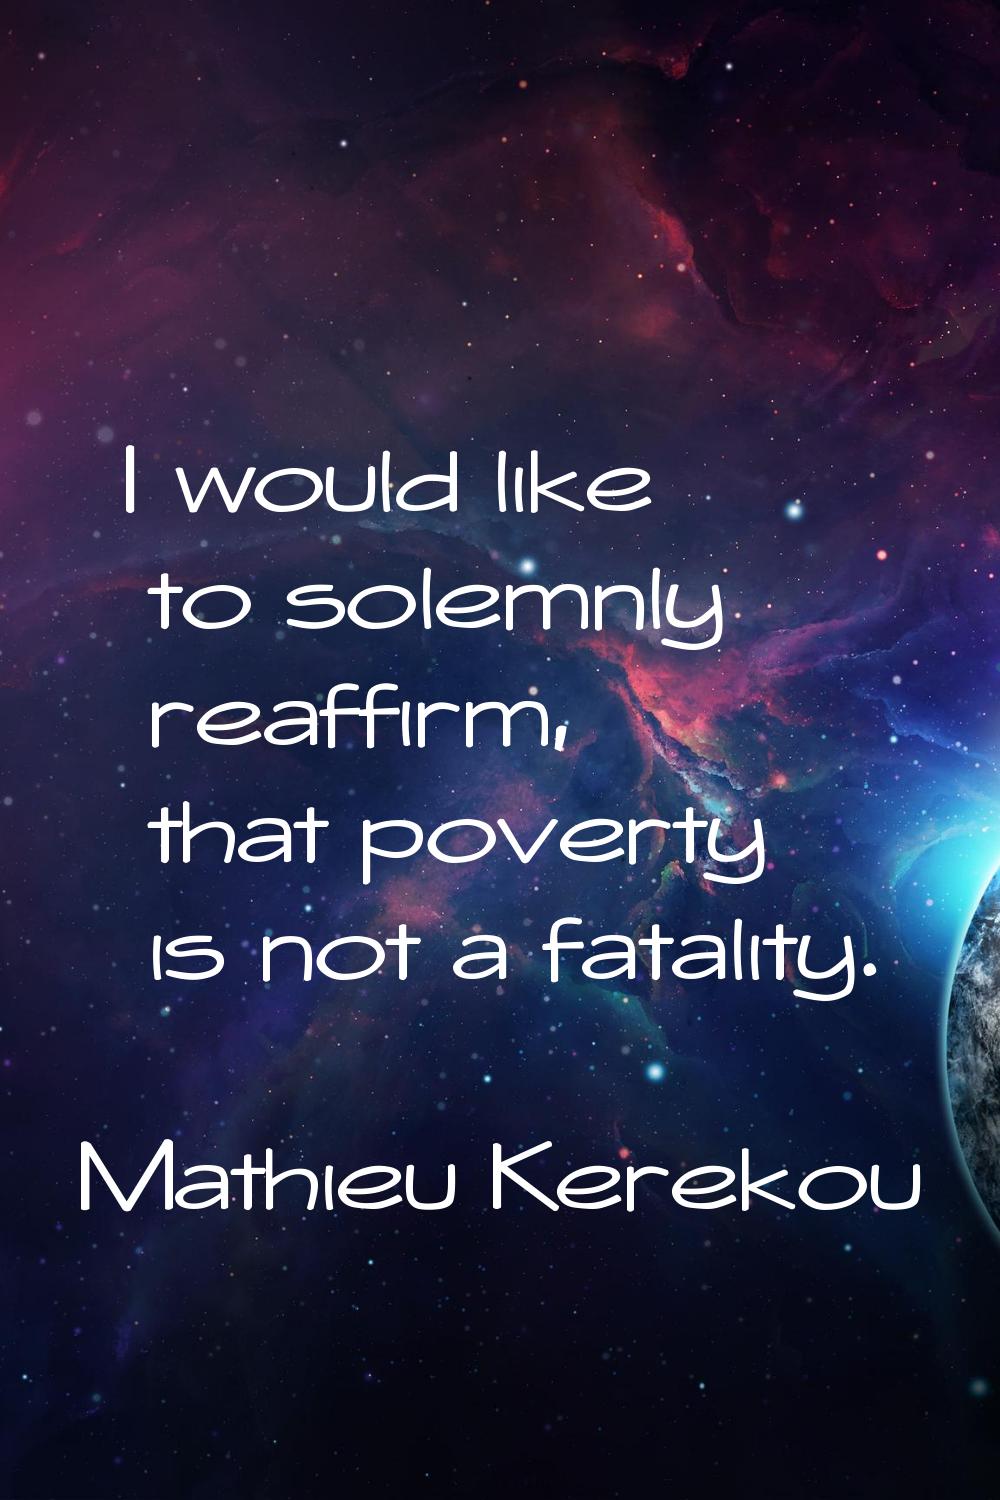 I would like to solemnly reaffirm, that poverty is not a fatality.